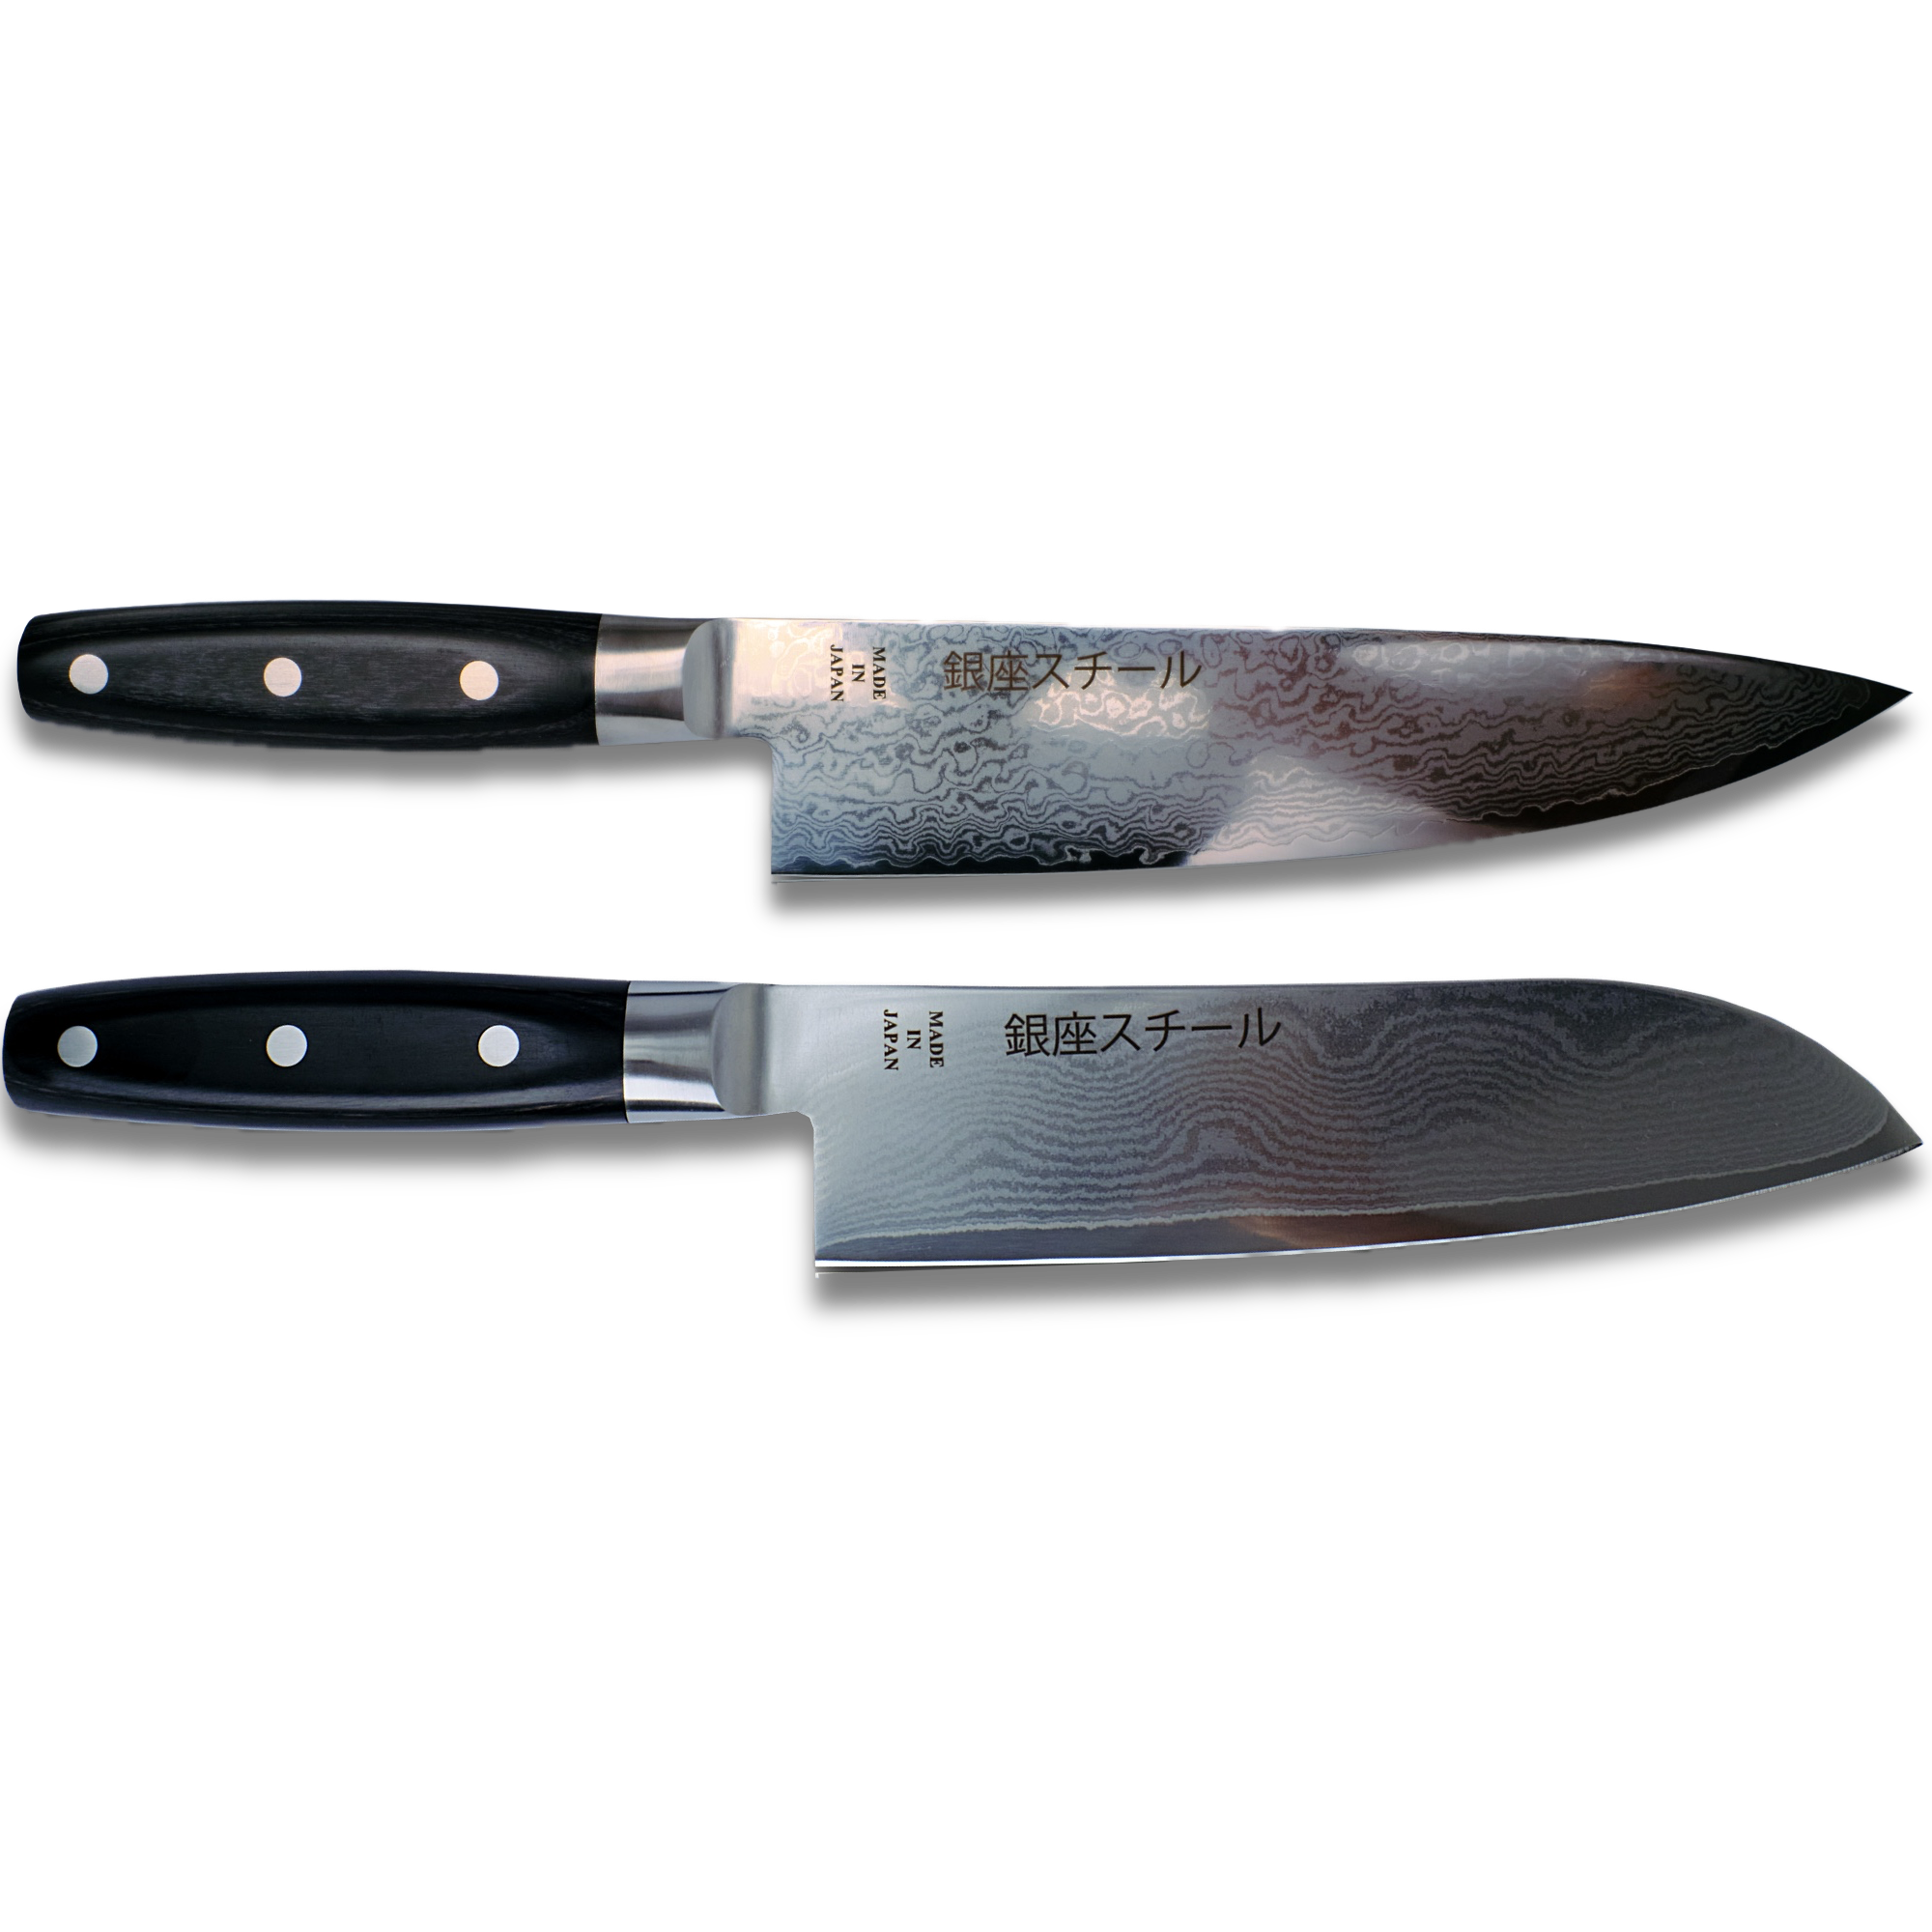 HAYAMI Essential set: Two VG10 Damascus Steel Knives, Made in Japan